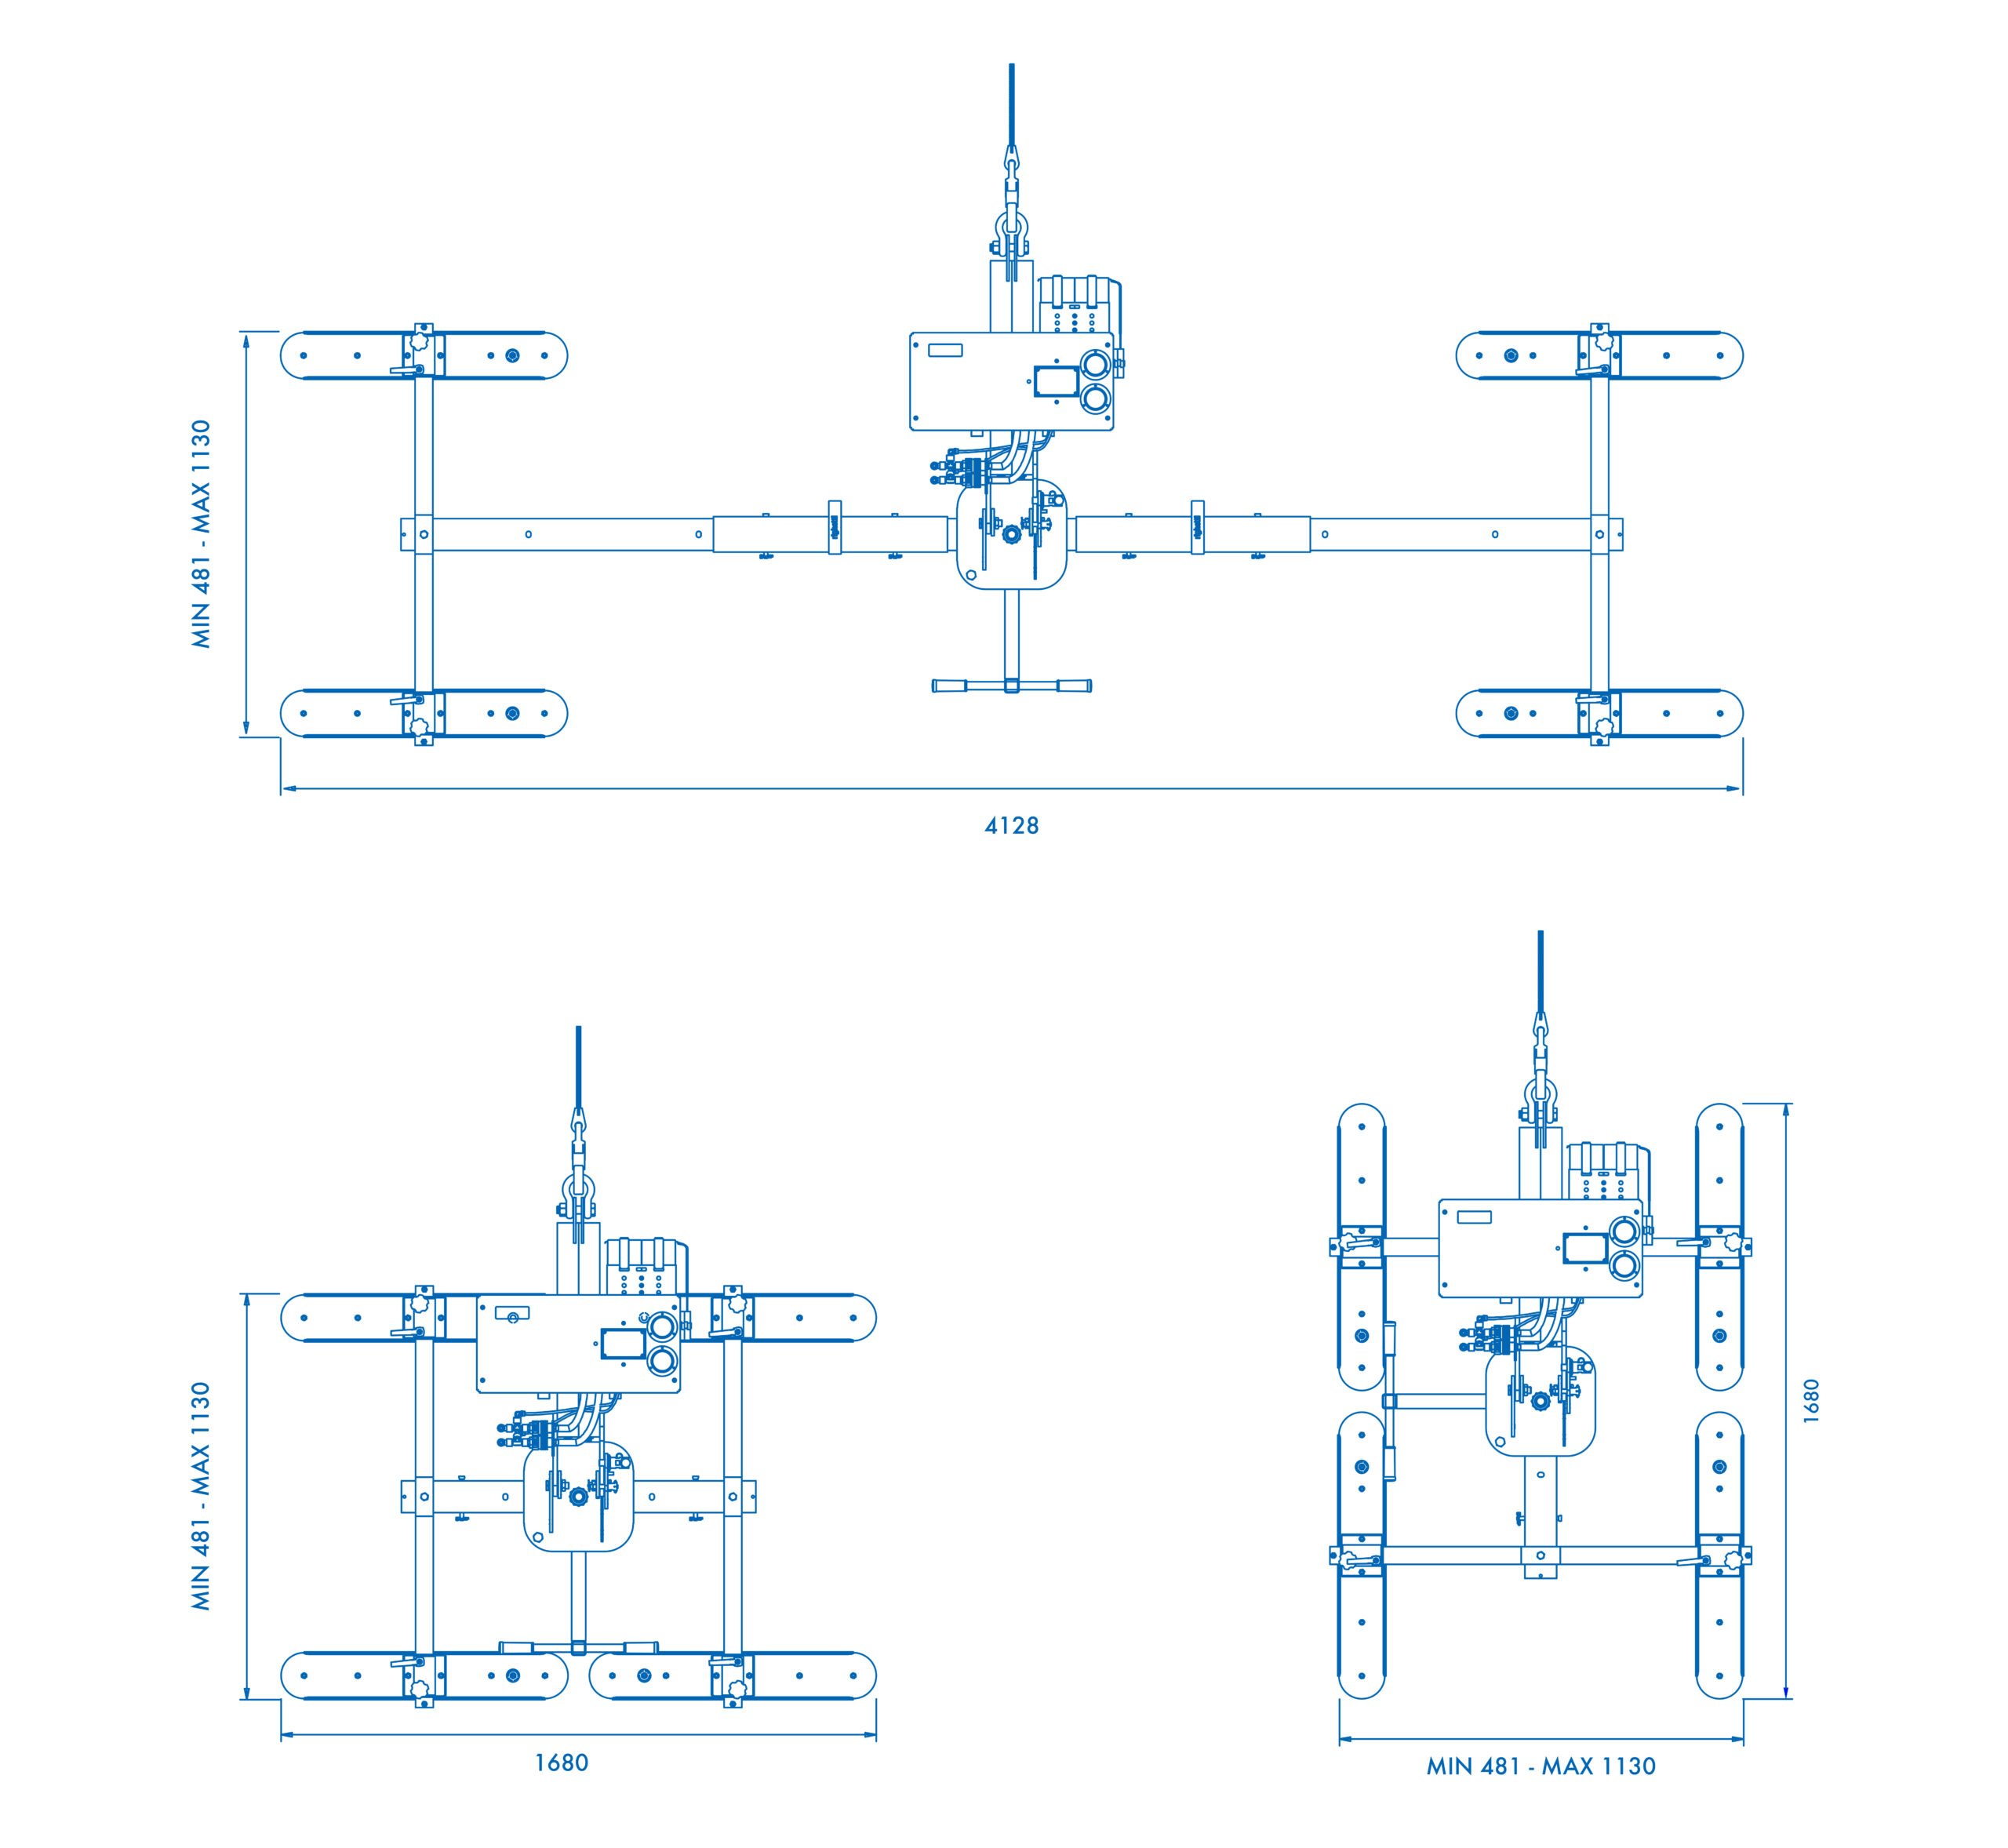 CL1-4 - Cladding Lifter - Dimensions